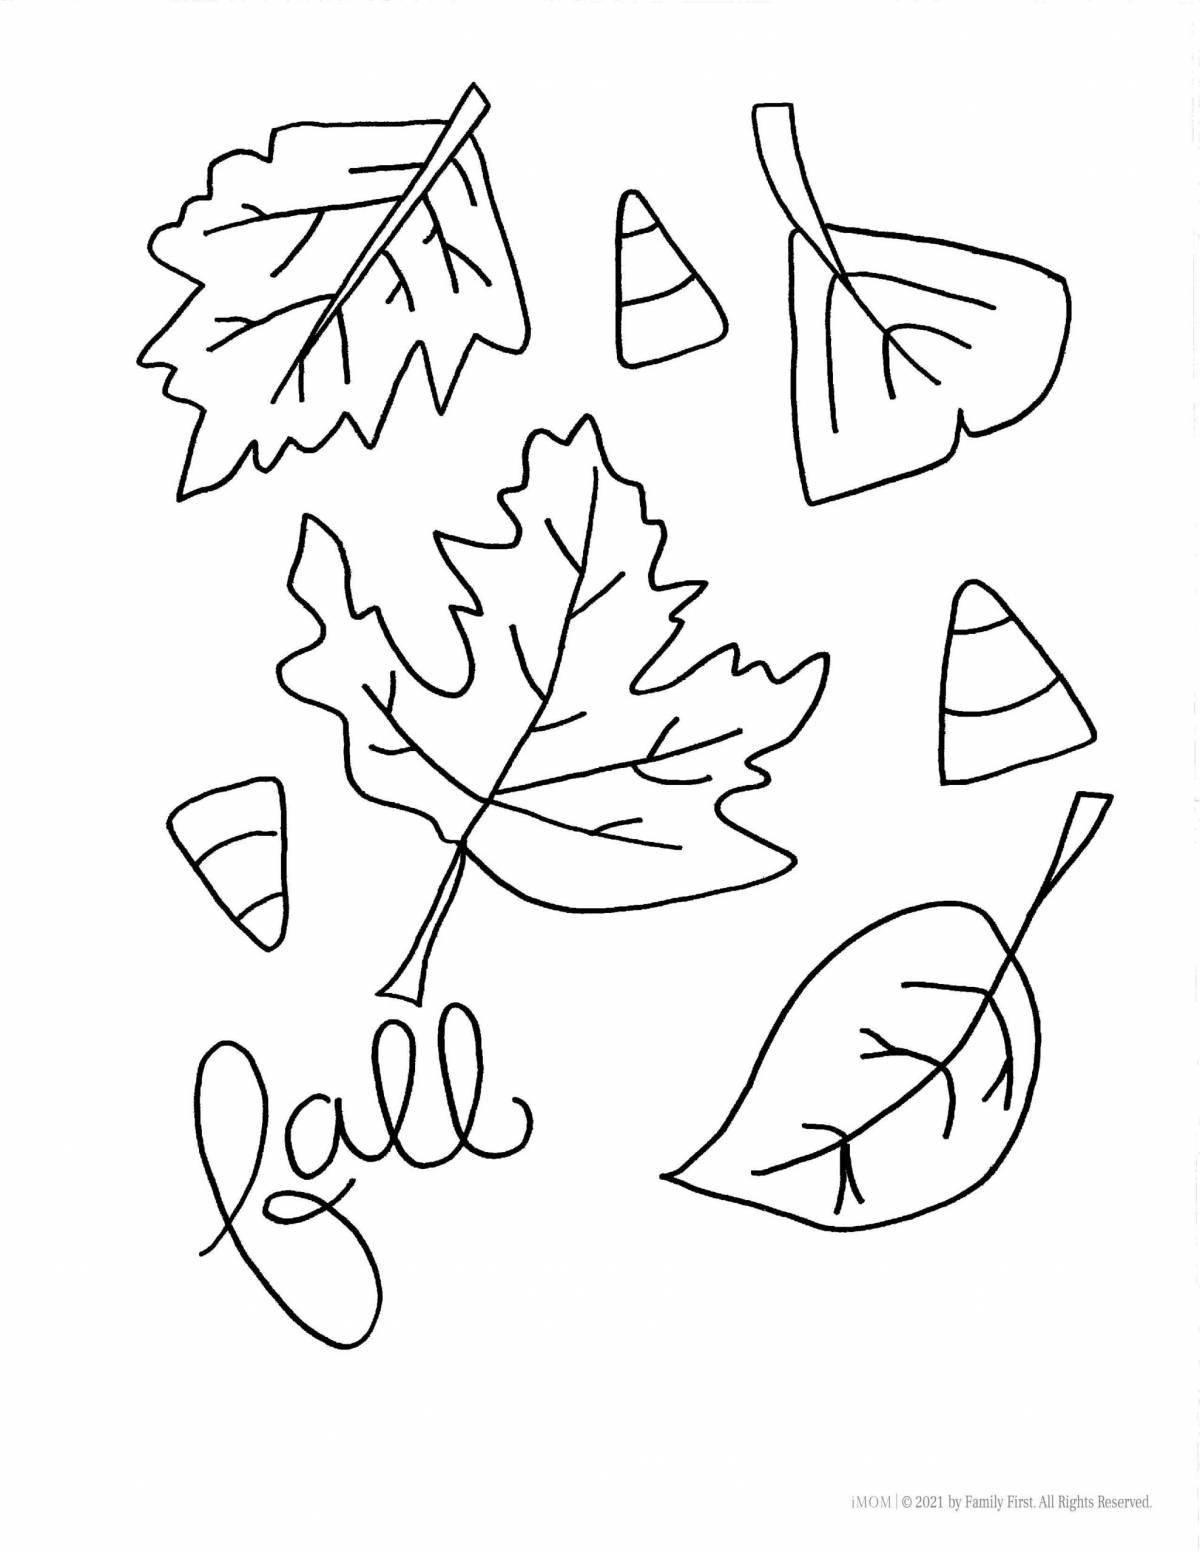 Rough autumn coloring book for children 5-6 years old